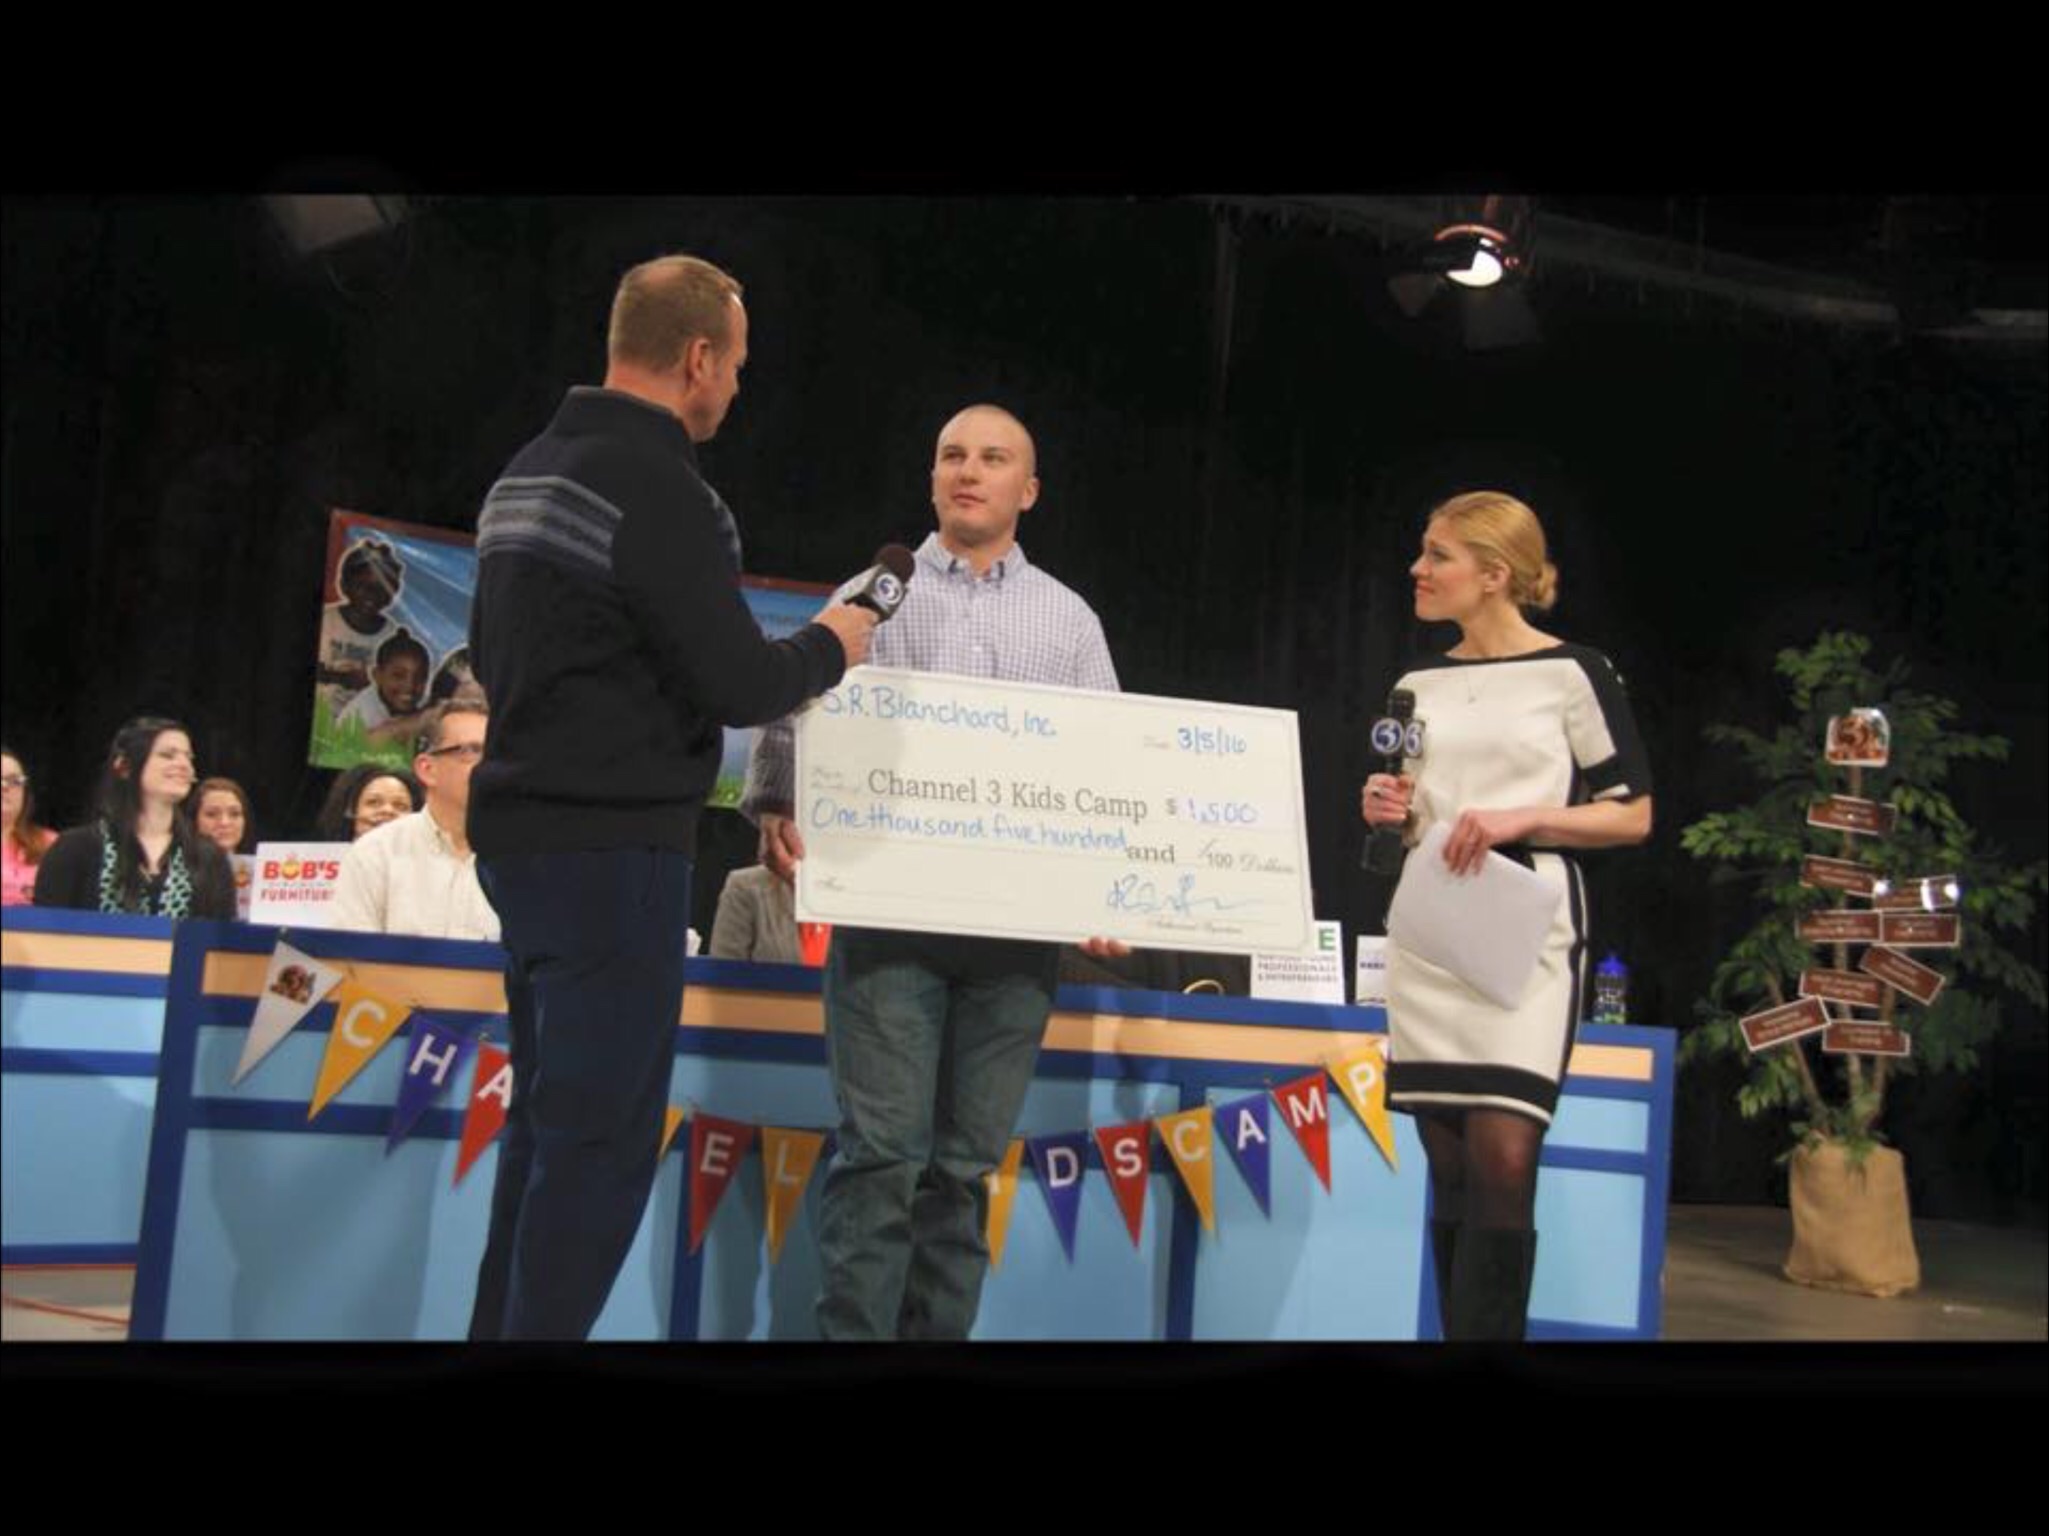 Steven at the annual Kids Camp Telethon with Scot and Nicole